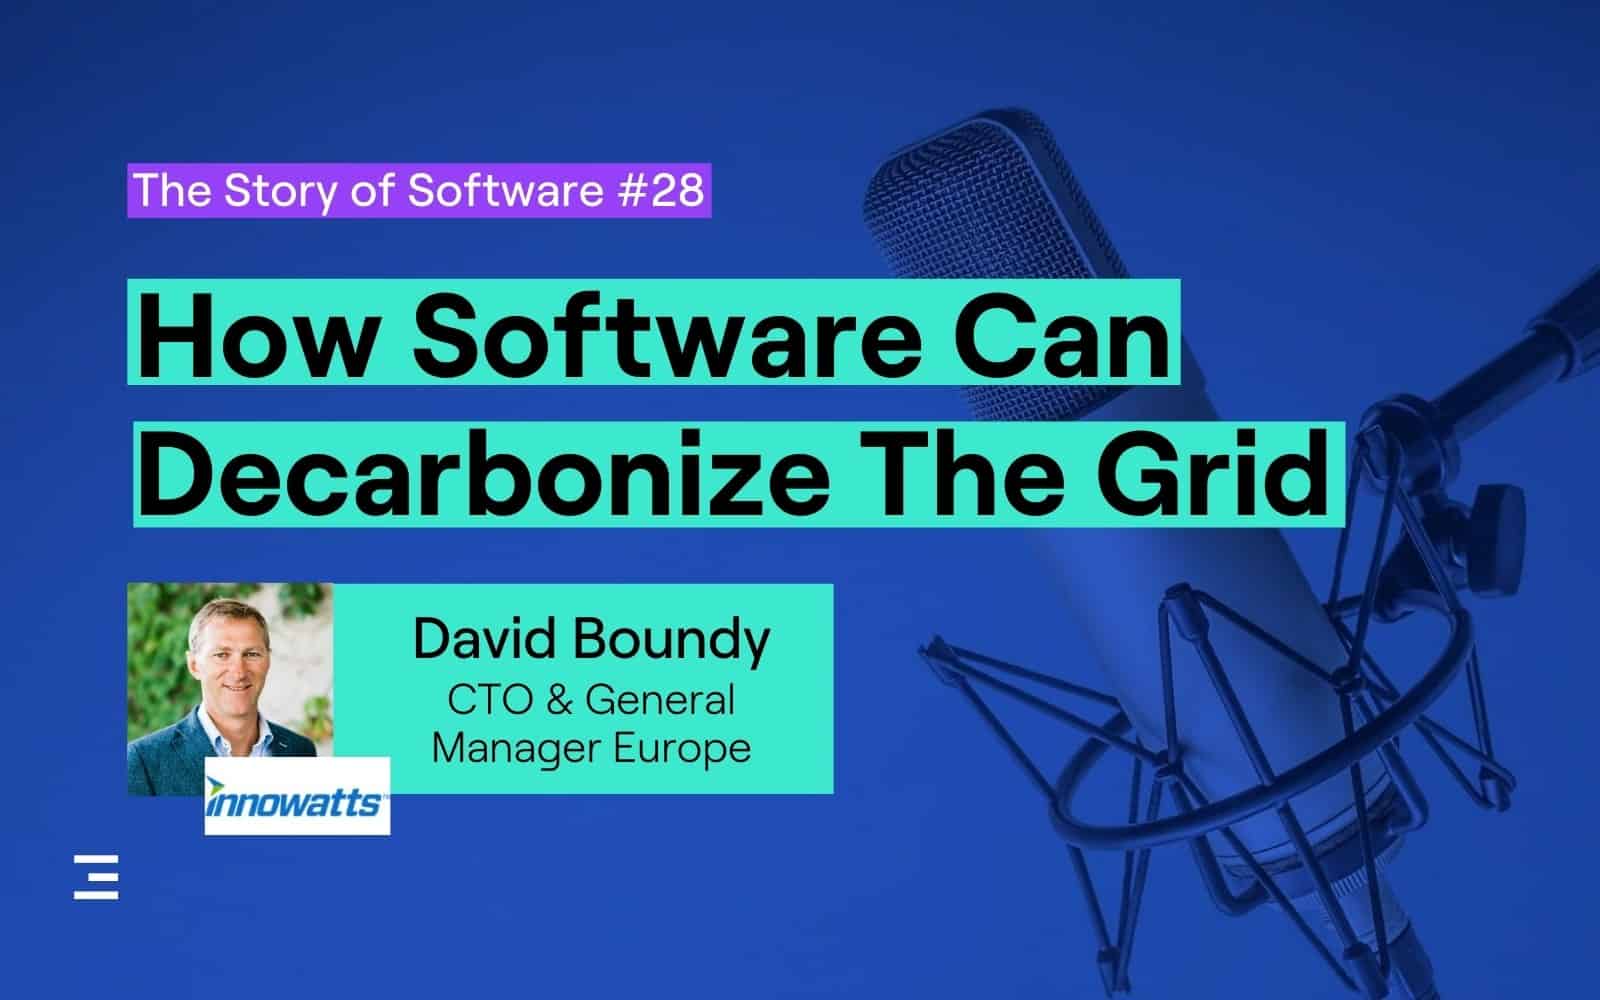 story of software episode on decarbonizing the grid with software